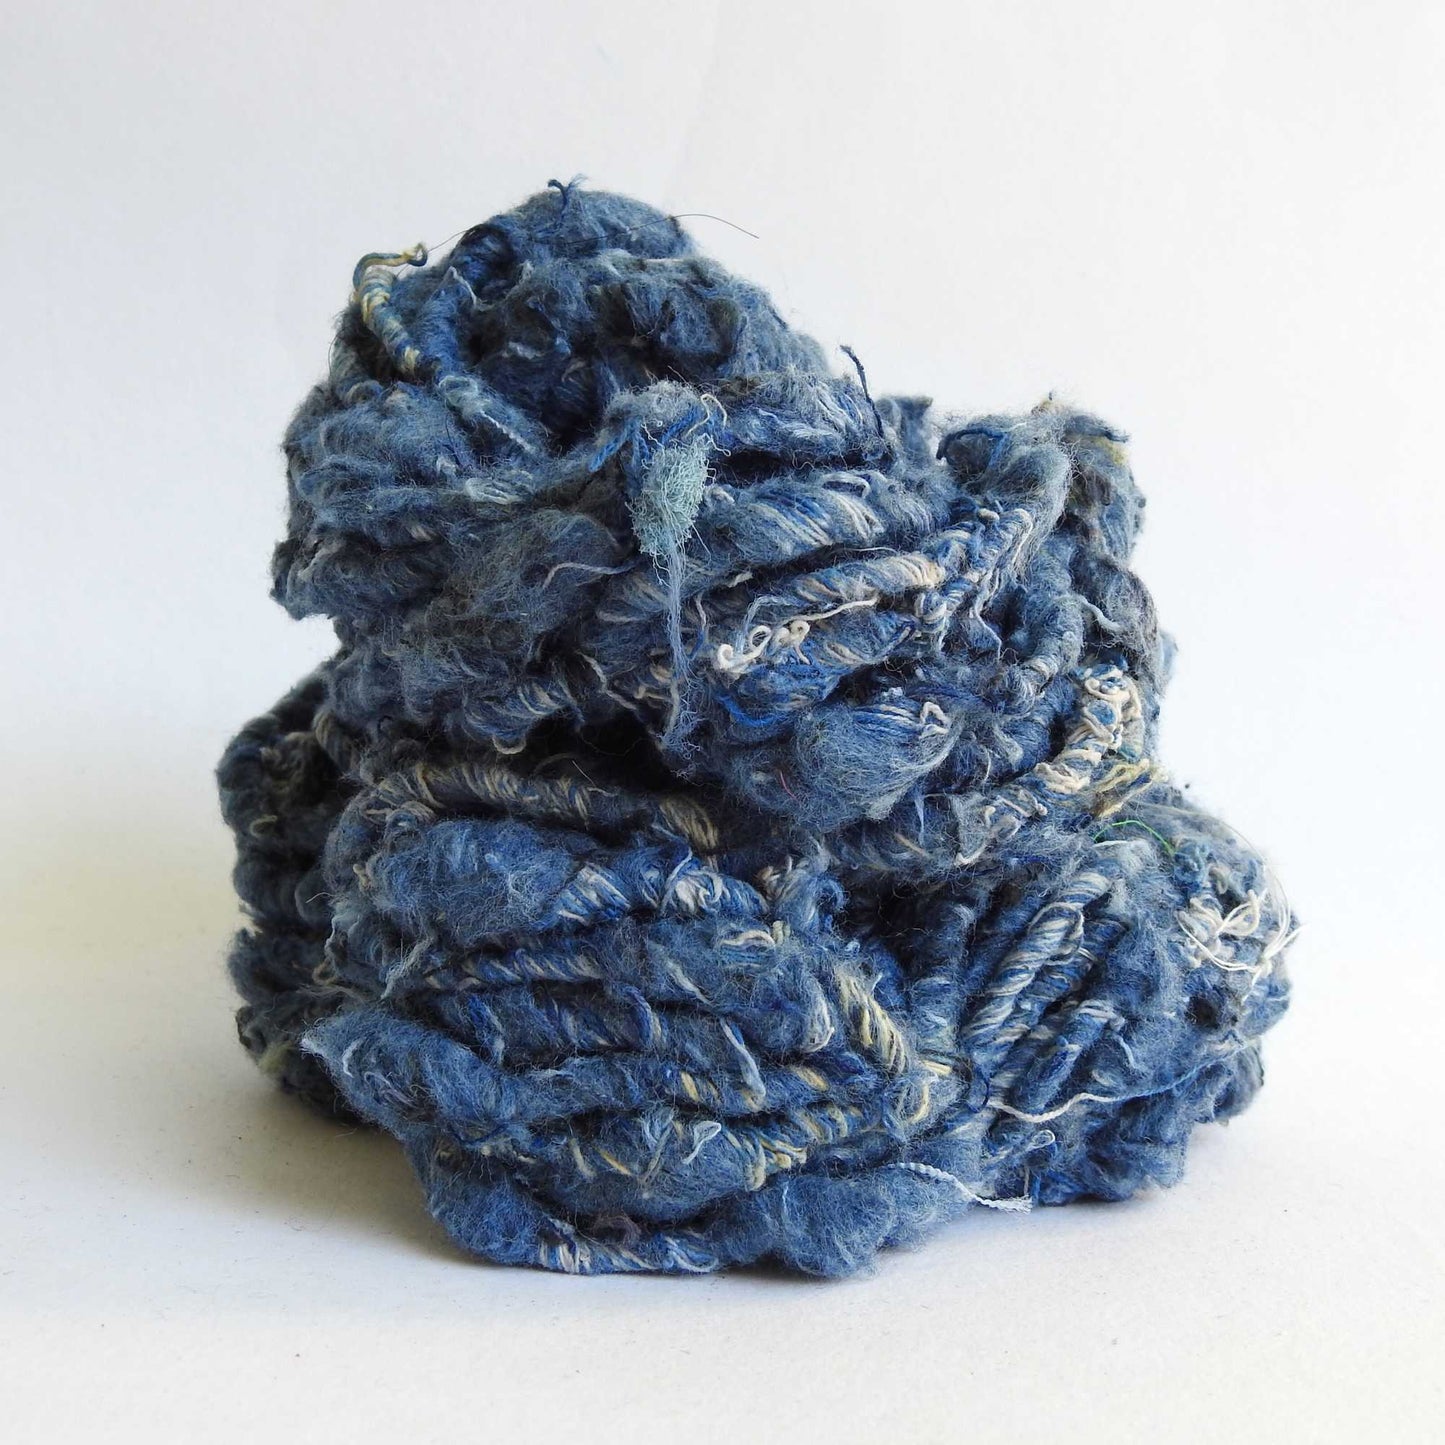 a hank of recycled denim yarn. our recycled denim is handspun with loads of texture. hand crafted from repurposed denim jeans. soft and chunky yarn for weaving, knitting, crochet